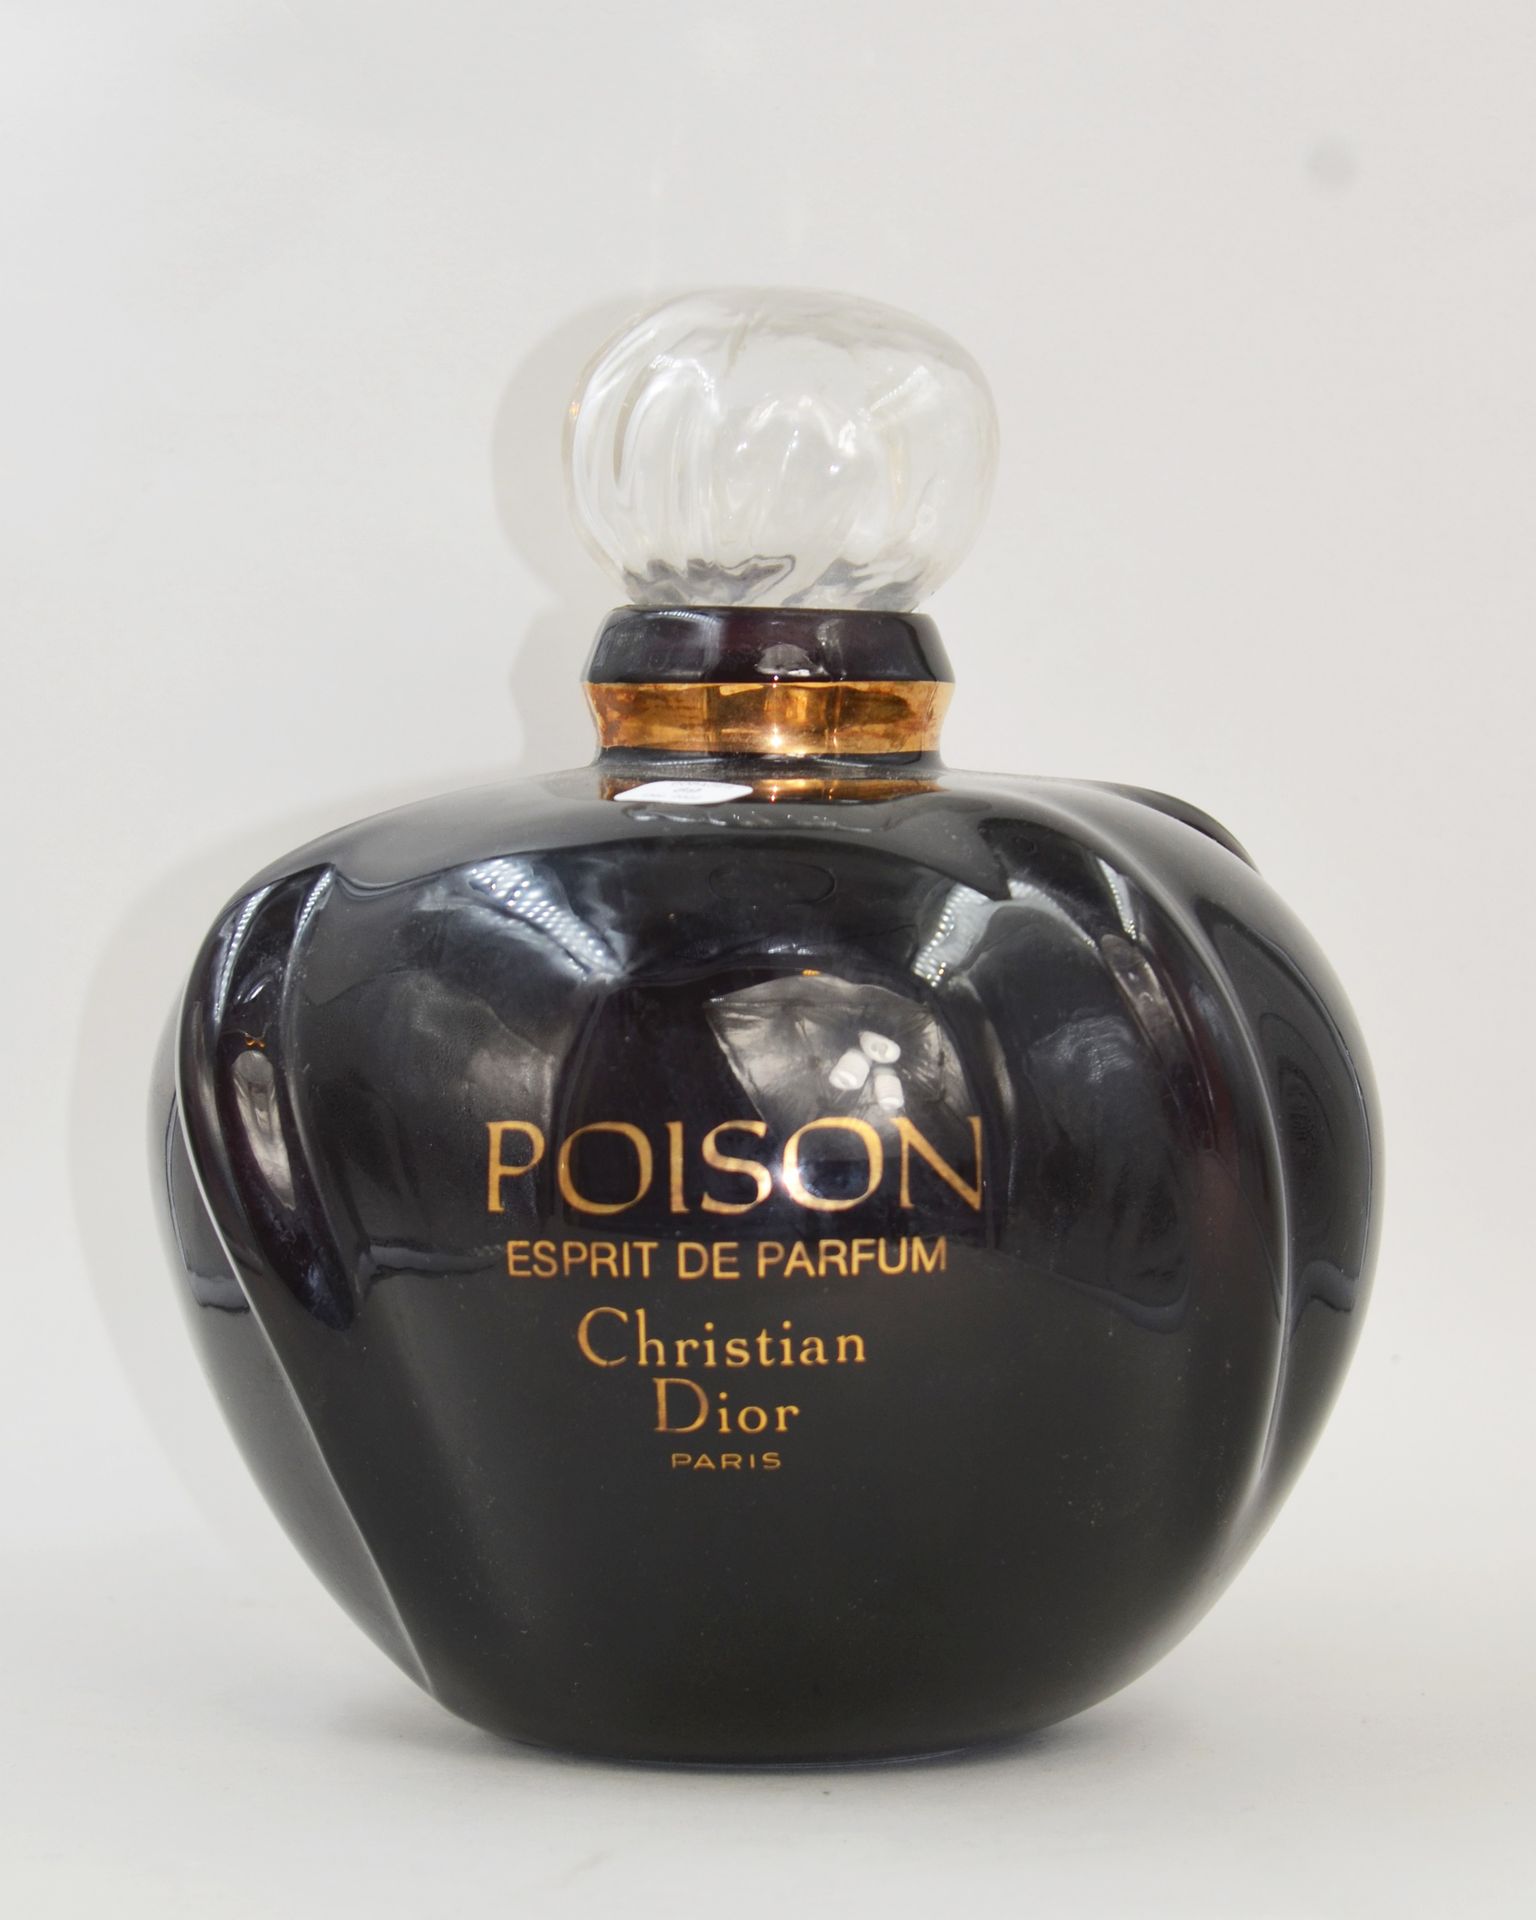 Null CHRISTIAN DIOR "Poison spirit of perfume

Dummy bottle of decoration, in pu&hellip;